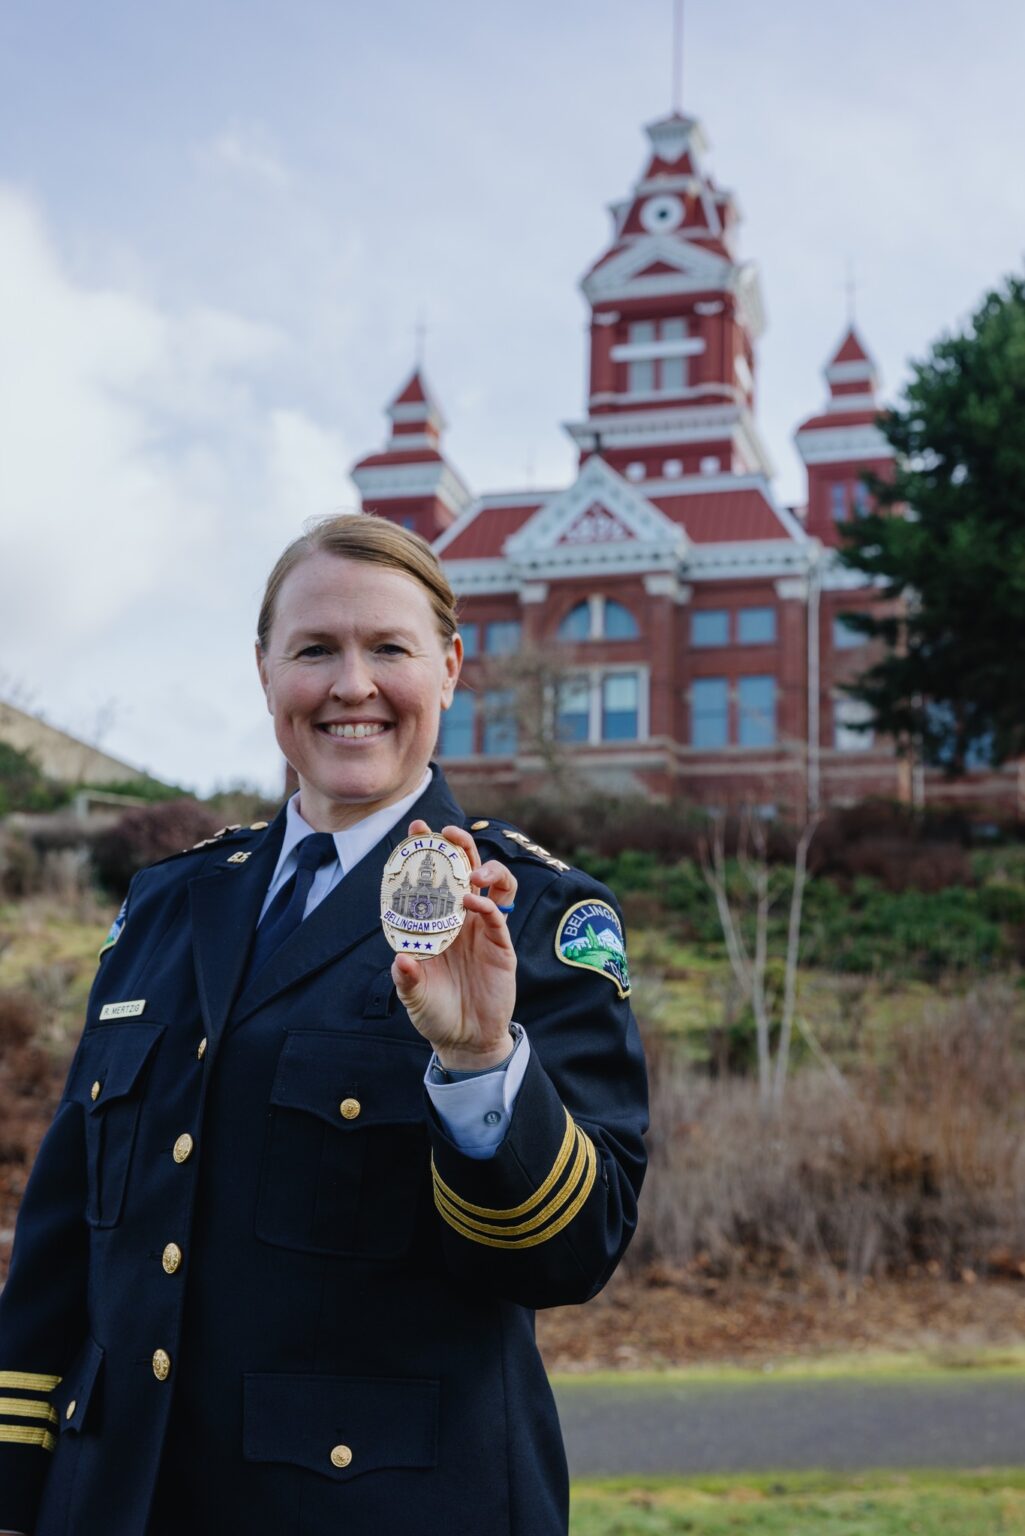 A woman with blond hair pulled back in a navy police uniform holds a police badge in front of a red building.